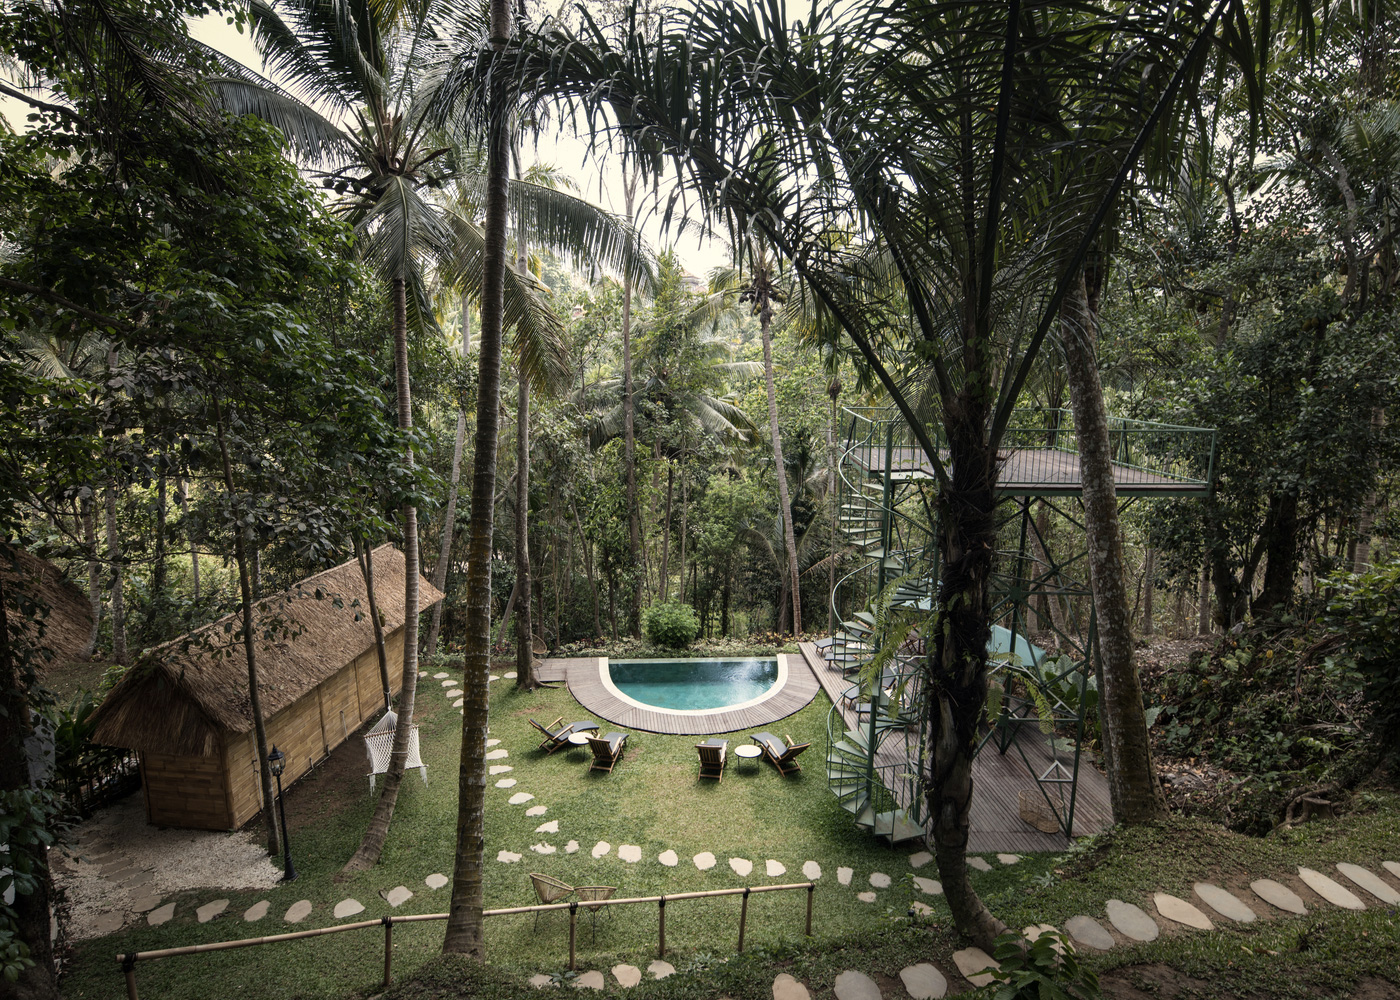 These treetop cabins in Indonesia have an unexpected industrial twist